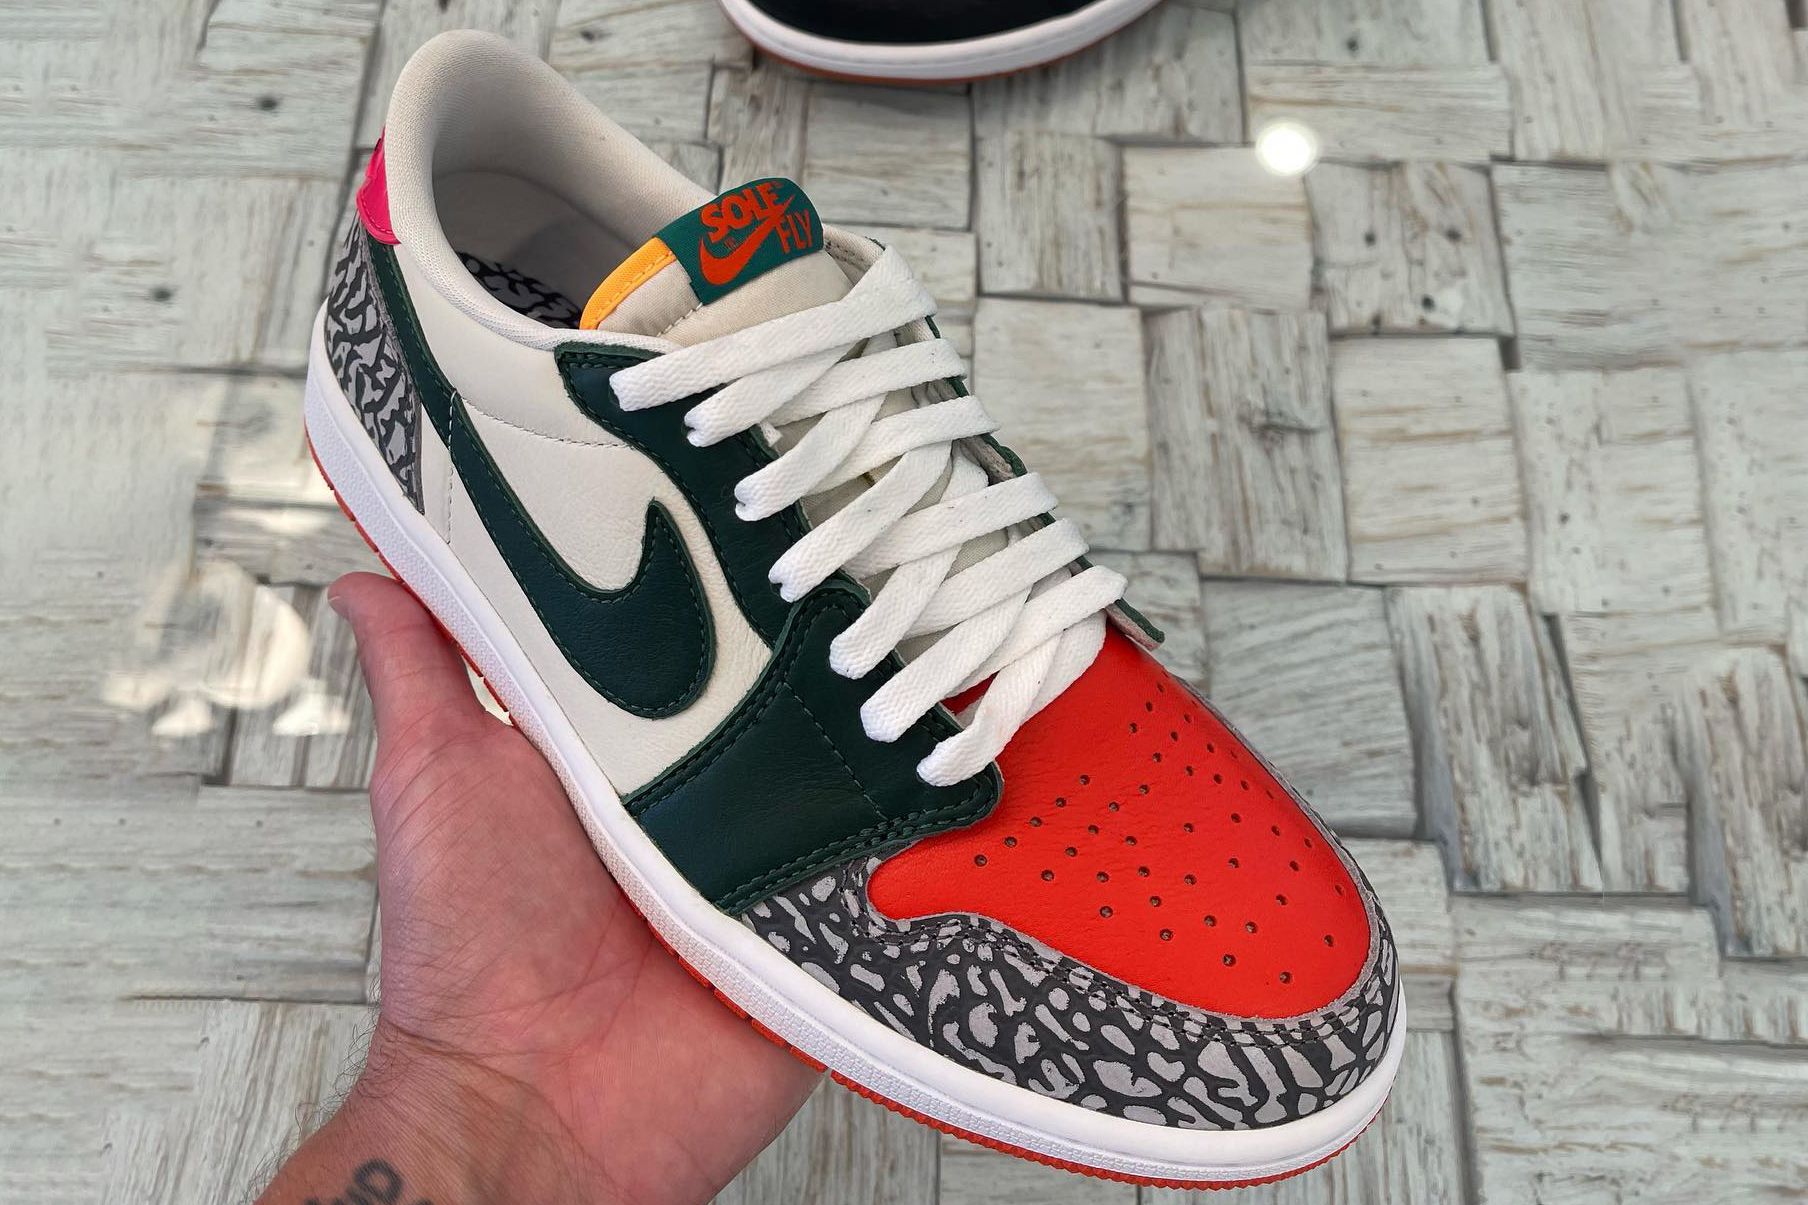 Solefly x Air Jordan 1 Low 'What the Solefly'